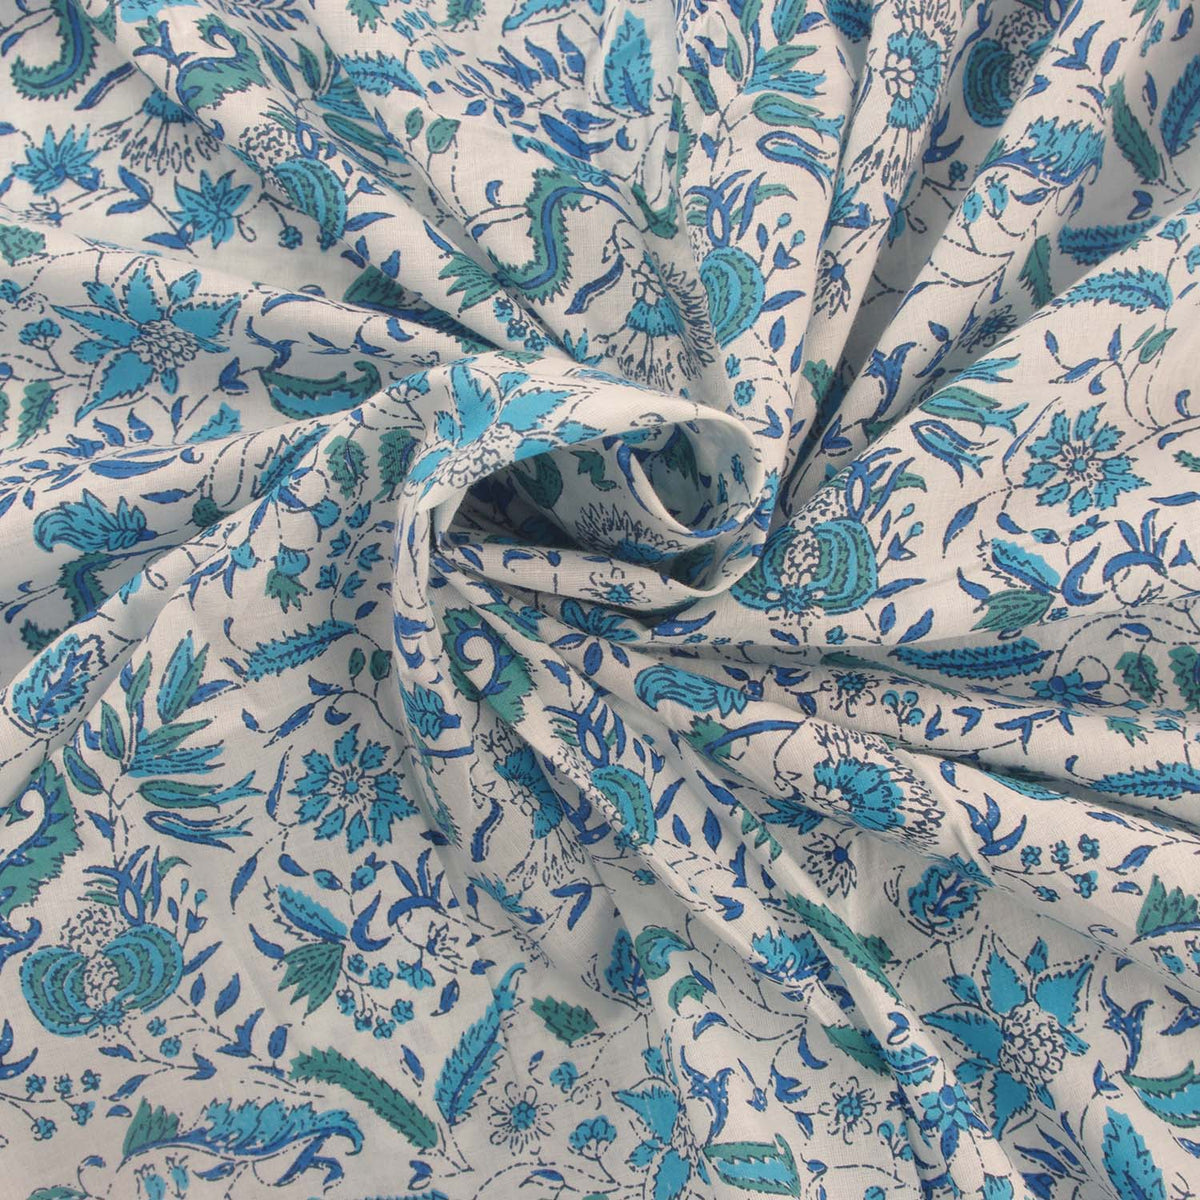 Blue Colonial Floral Hand Block Printed Cotton Fabric Design 531